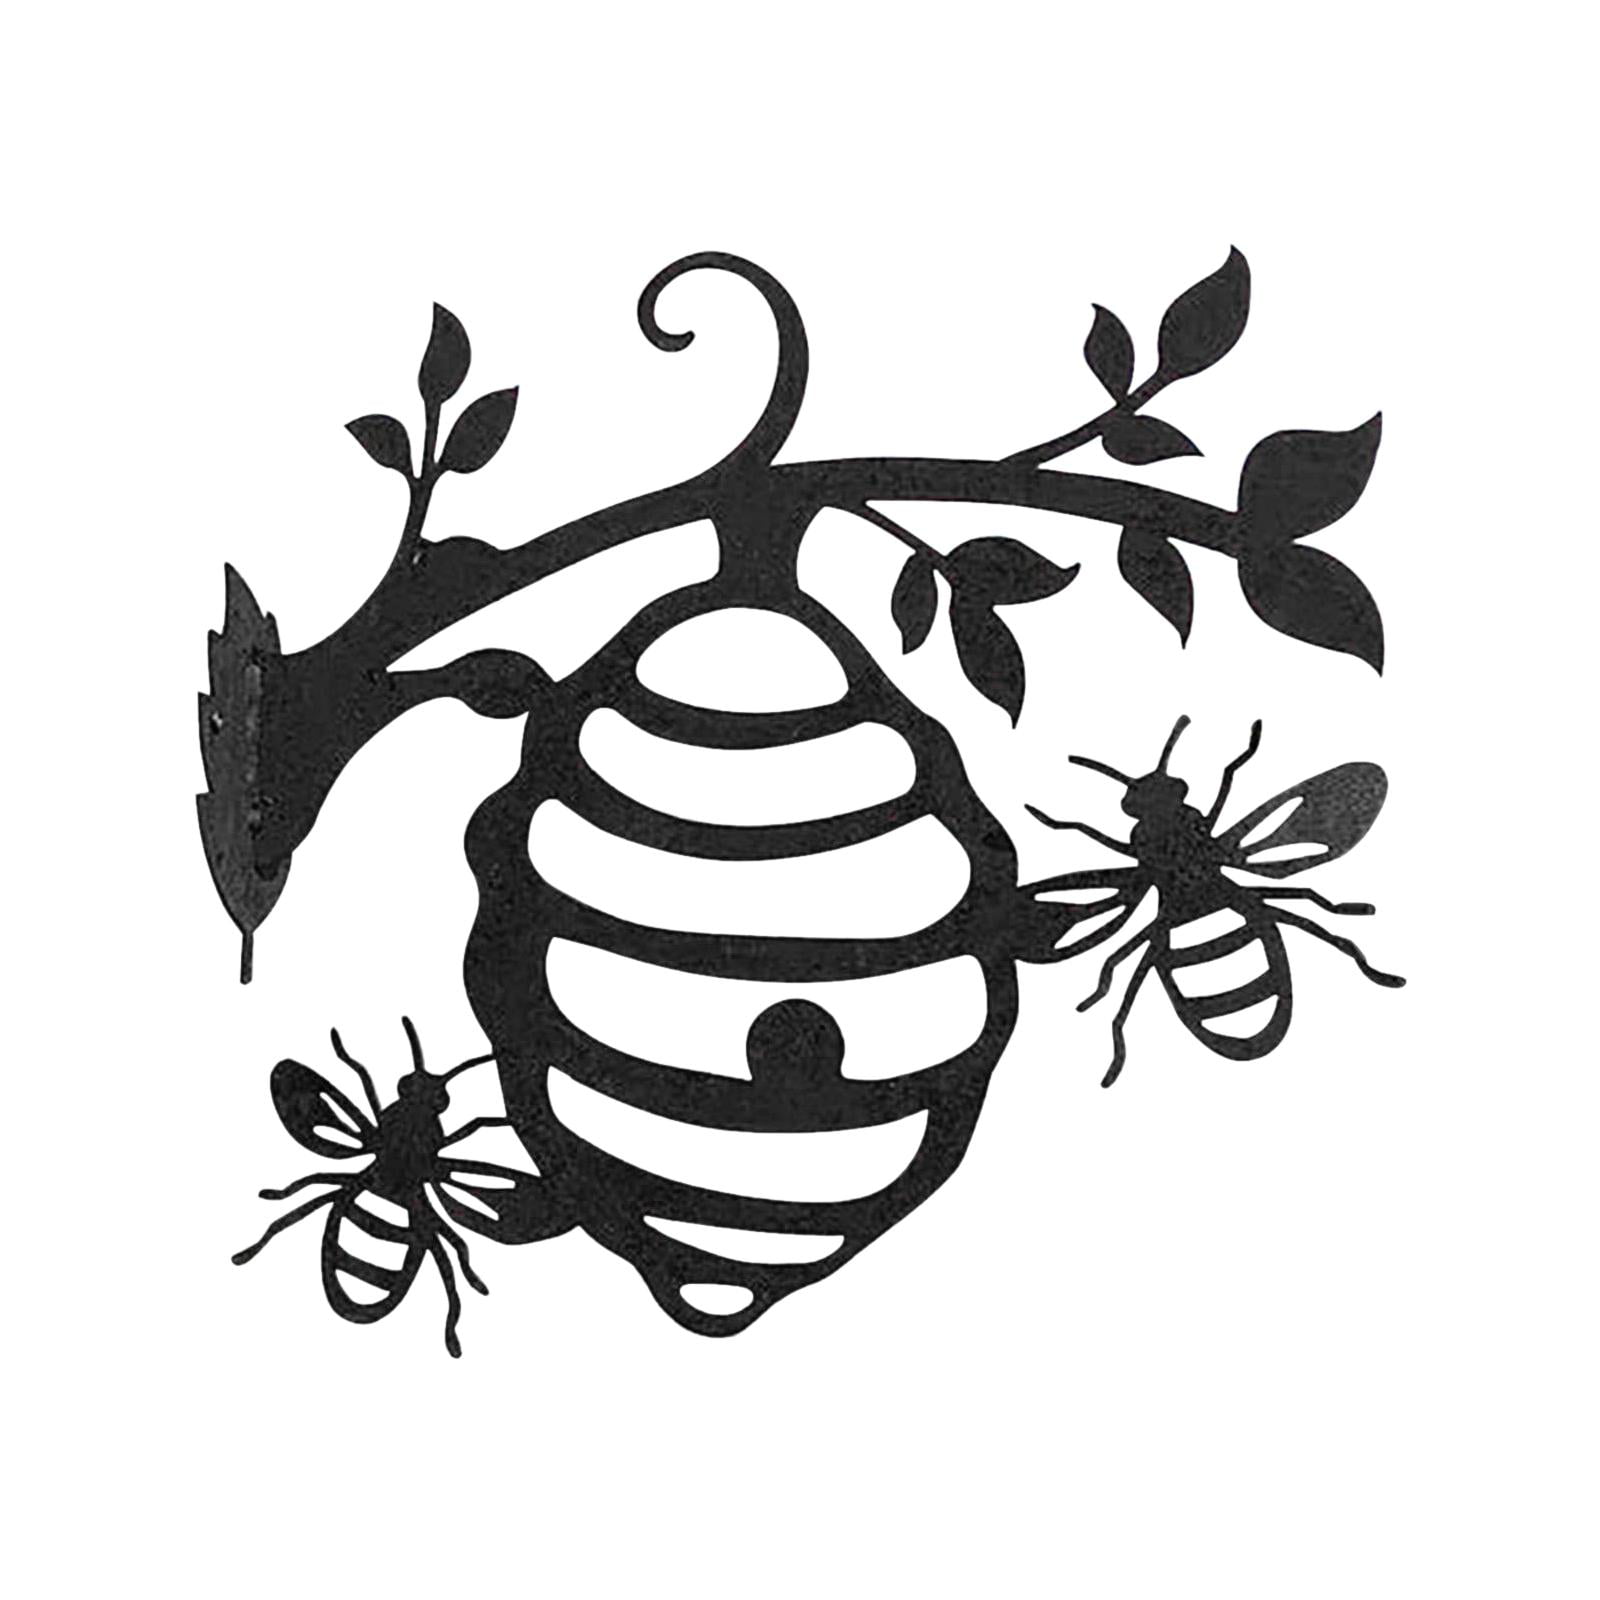 Metal Bee Wall Art Hanging Décor Insect Ornaments for Patio Garden Backyard 